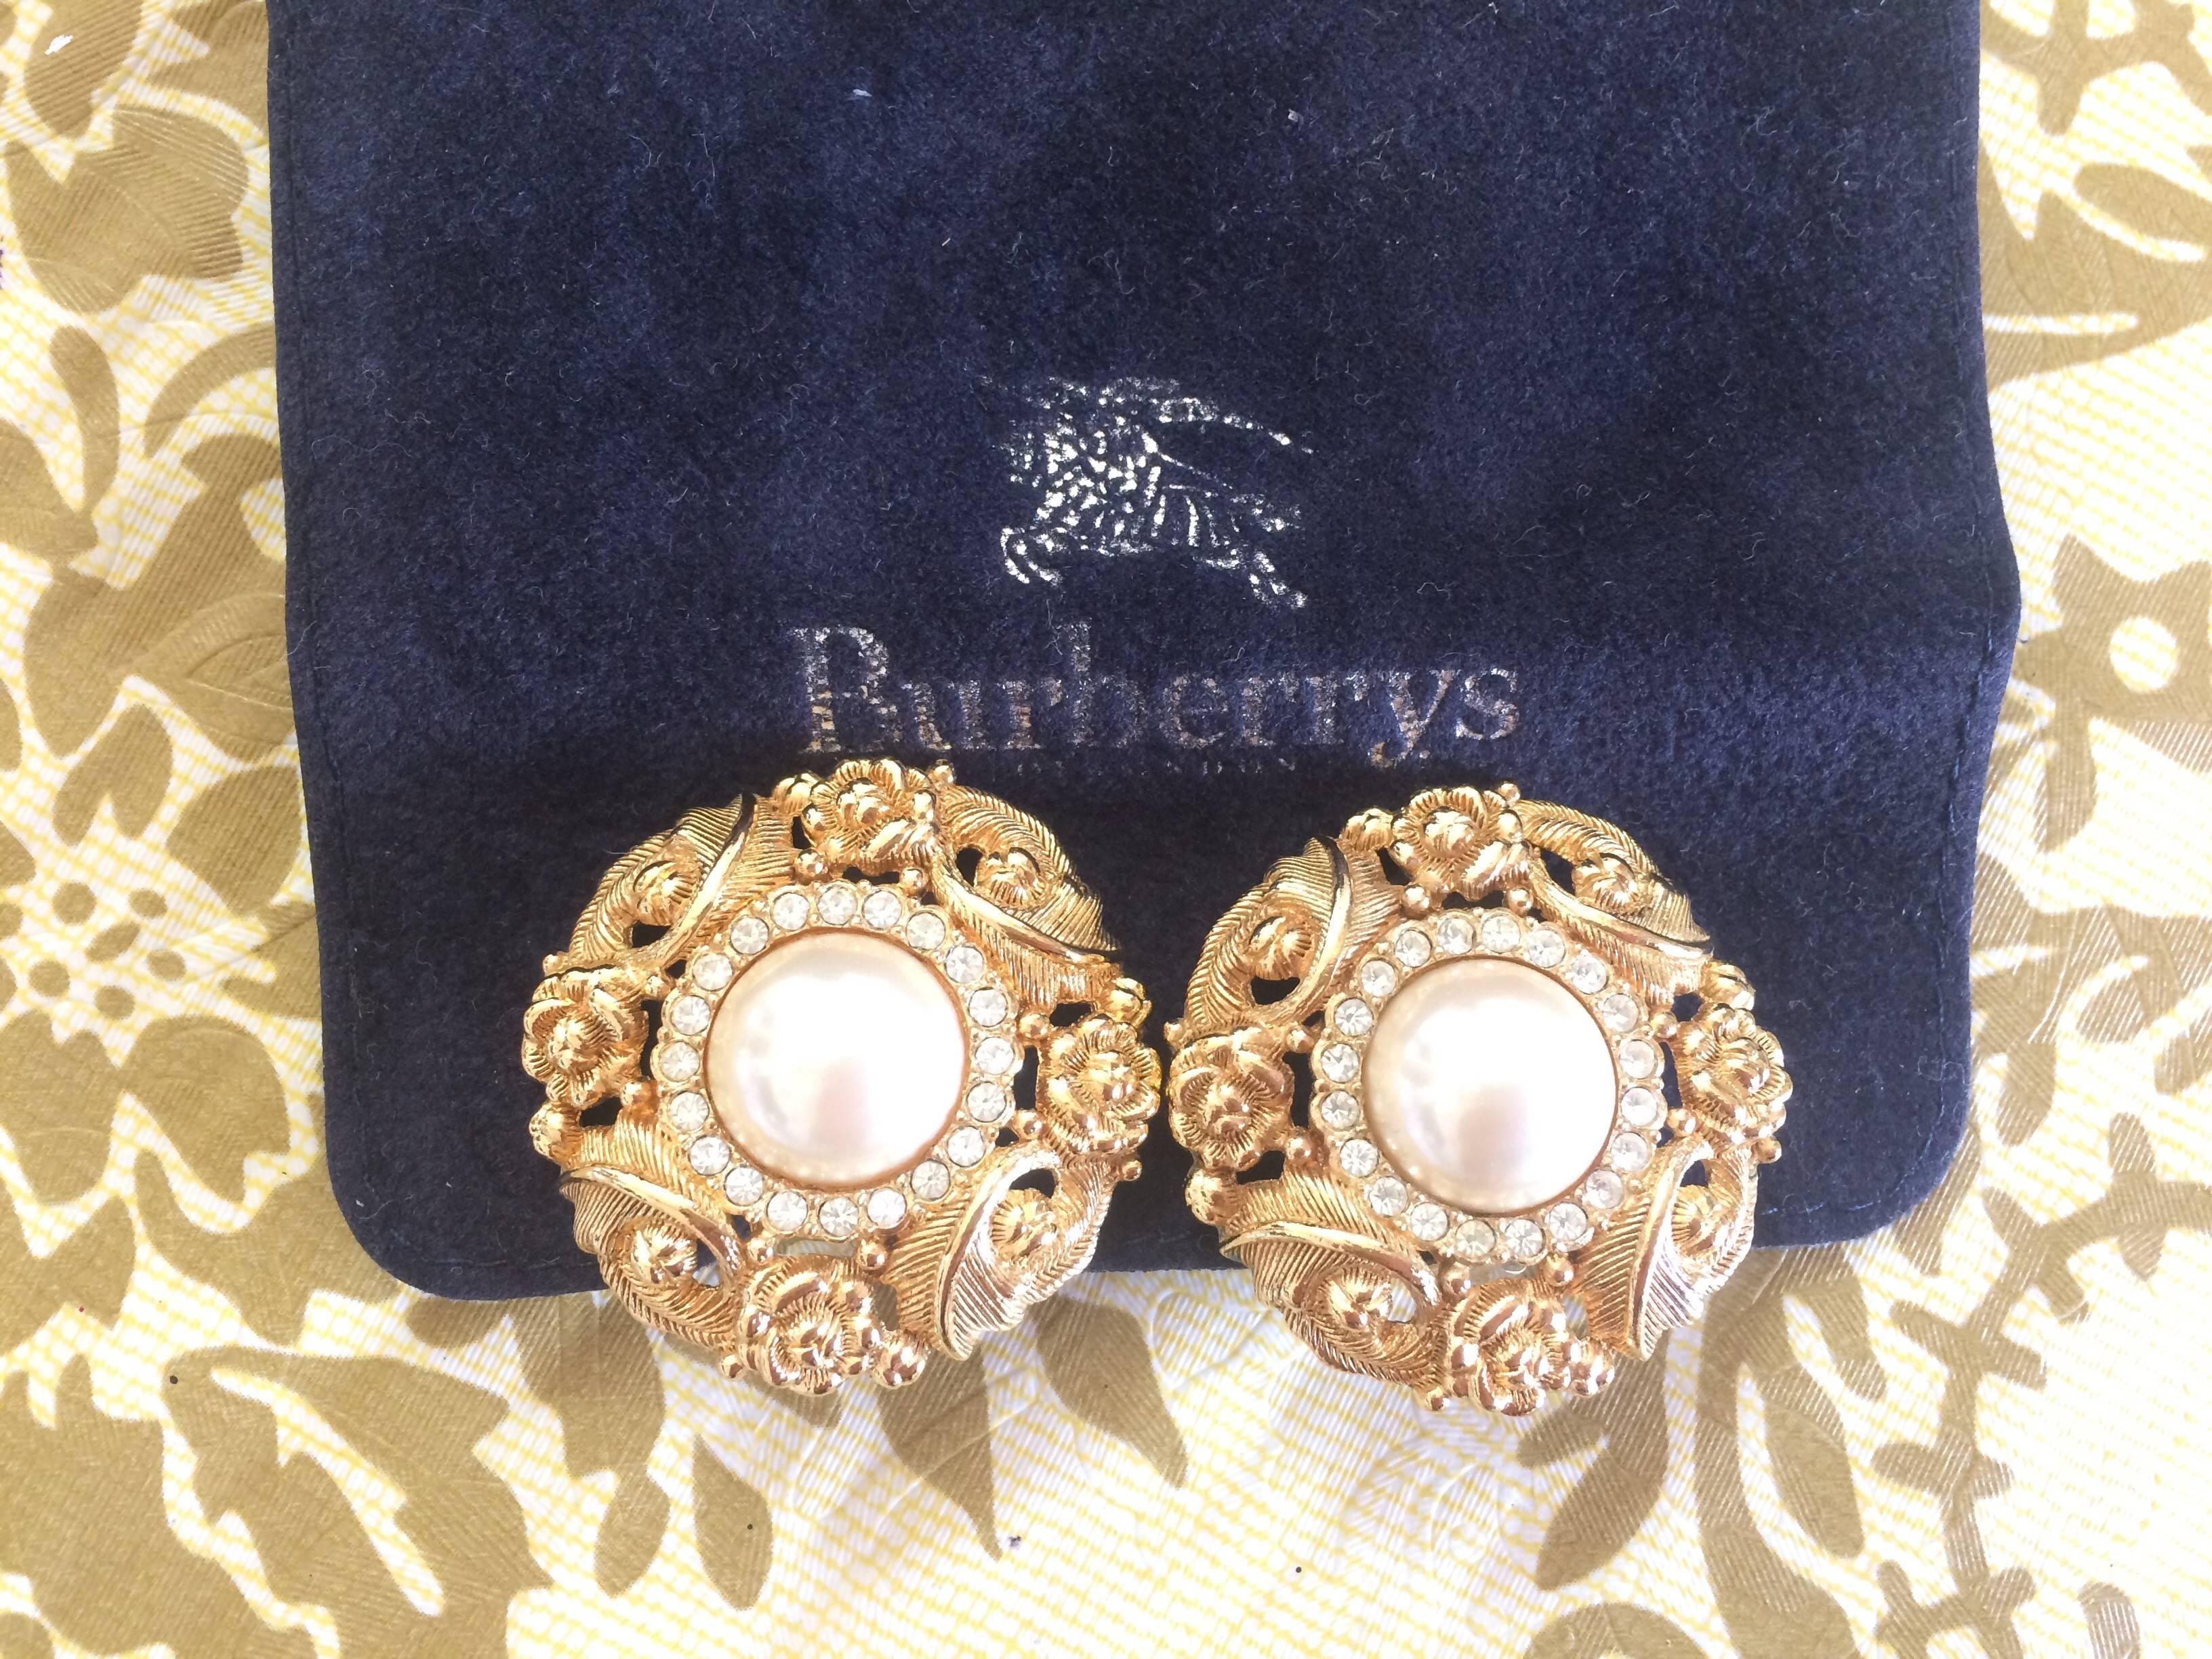 1990s. Vintage Burberrys golden Edwardian flower and arabesque design earrings with faux pearl, crystal stones,. Rare Burberry masterpiece.

Elegant and gorgeous vintage jewelry is here for you from Burberry, back in the old era! 
Great gift idea.